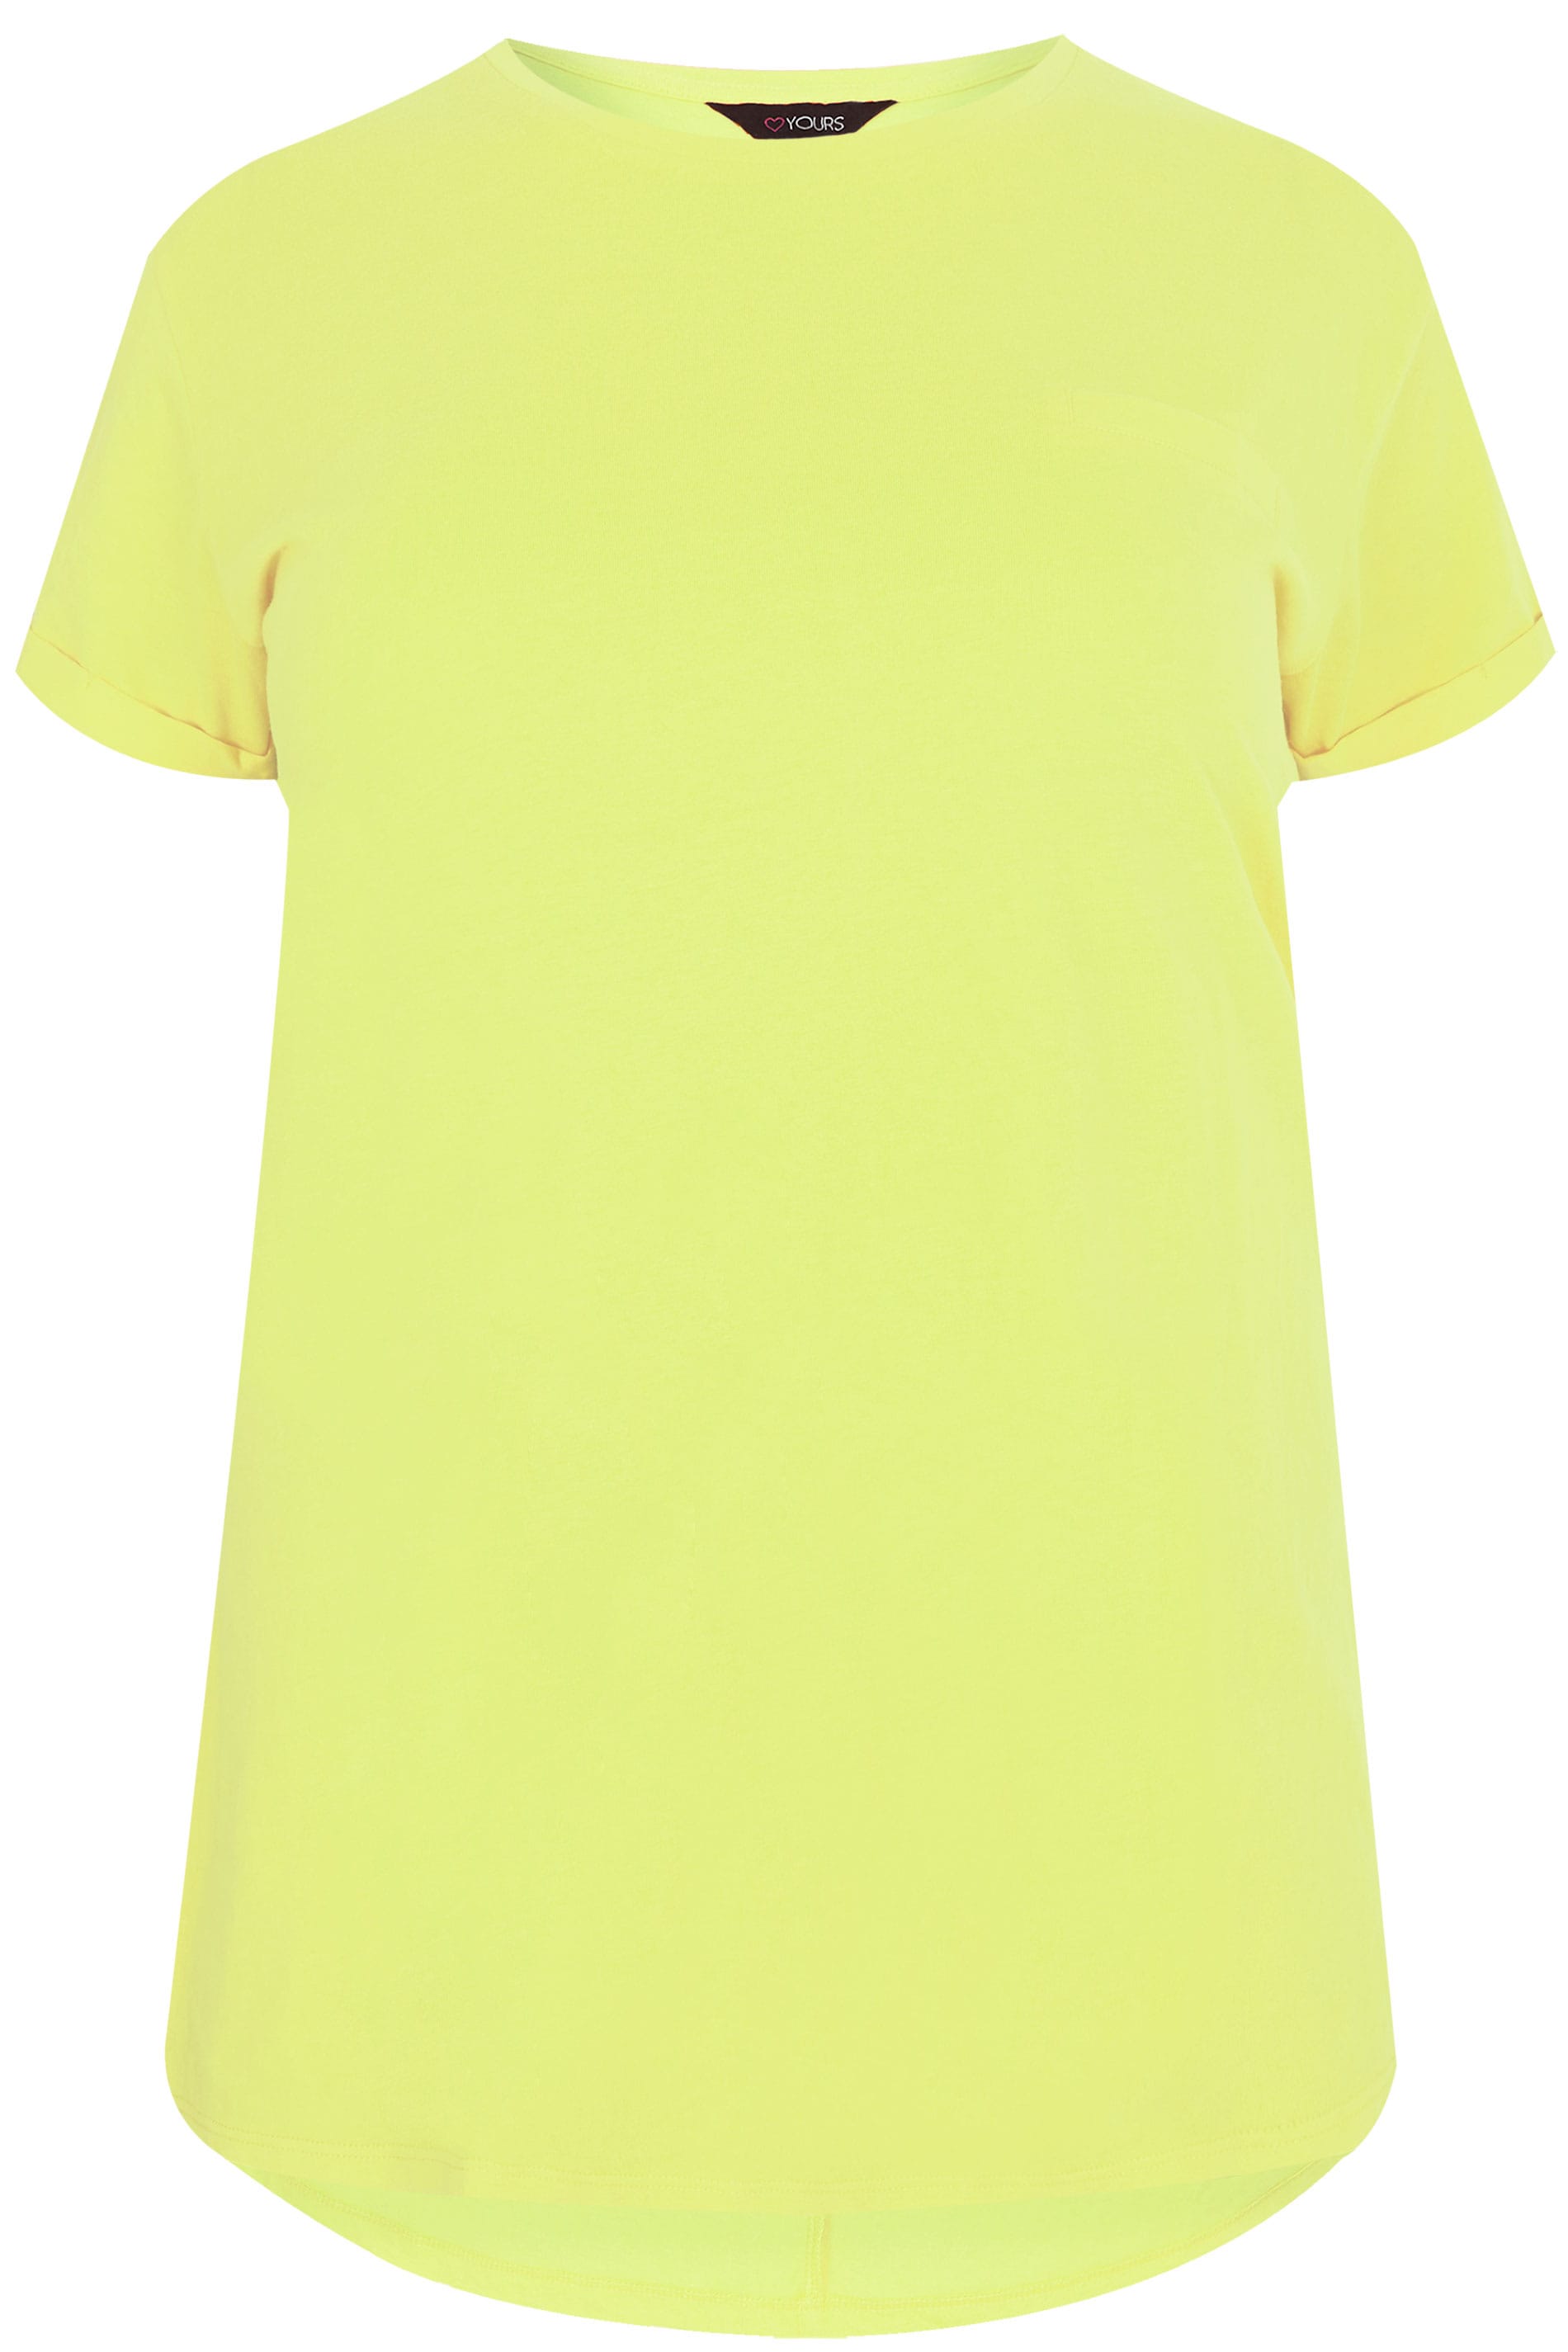 Lime Green Mock Pocket T-Shirt | Plus Sizes 16 to 36 | Yours Clothing